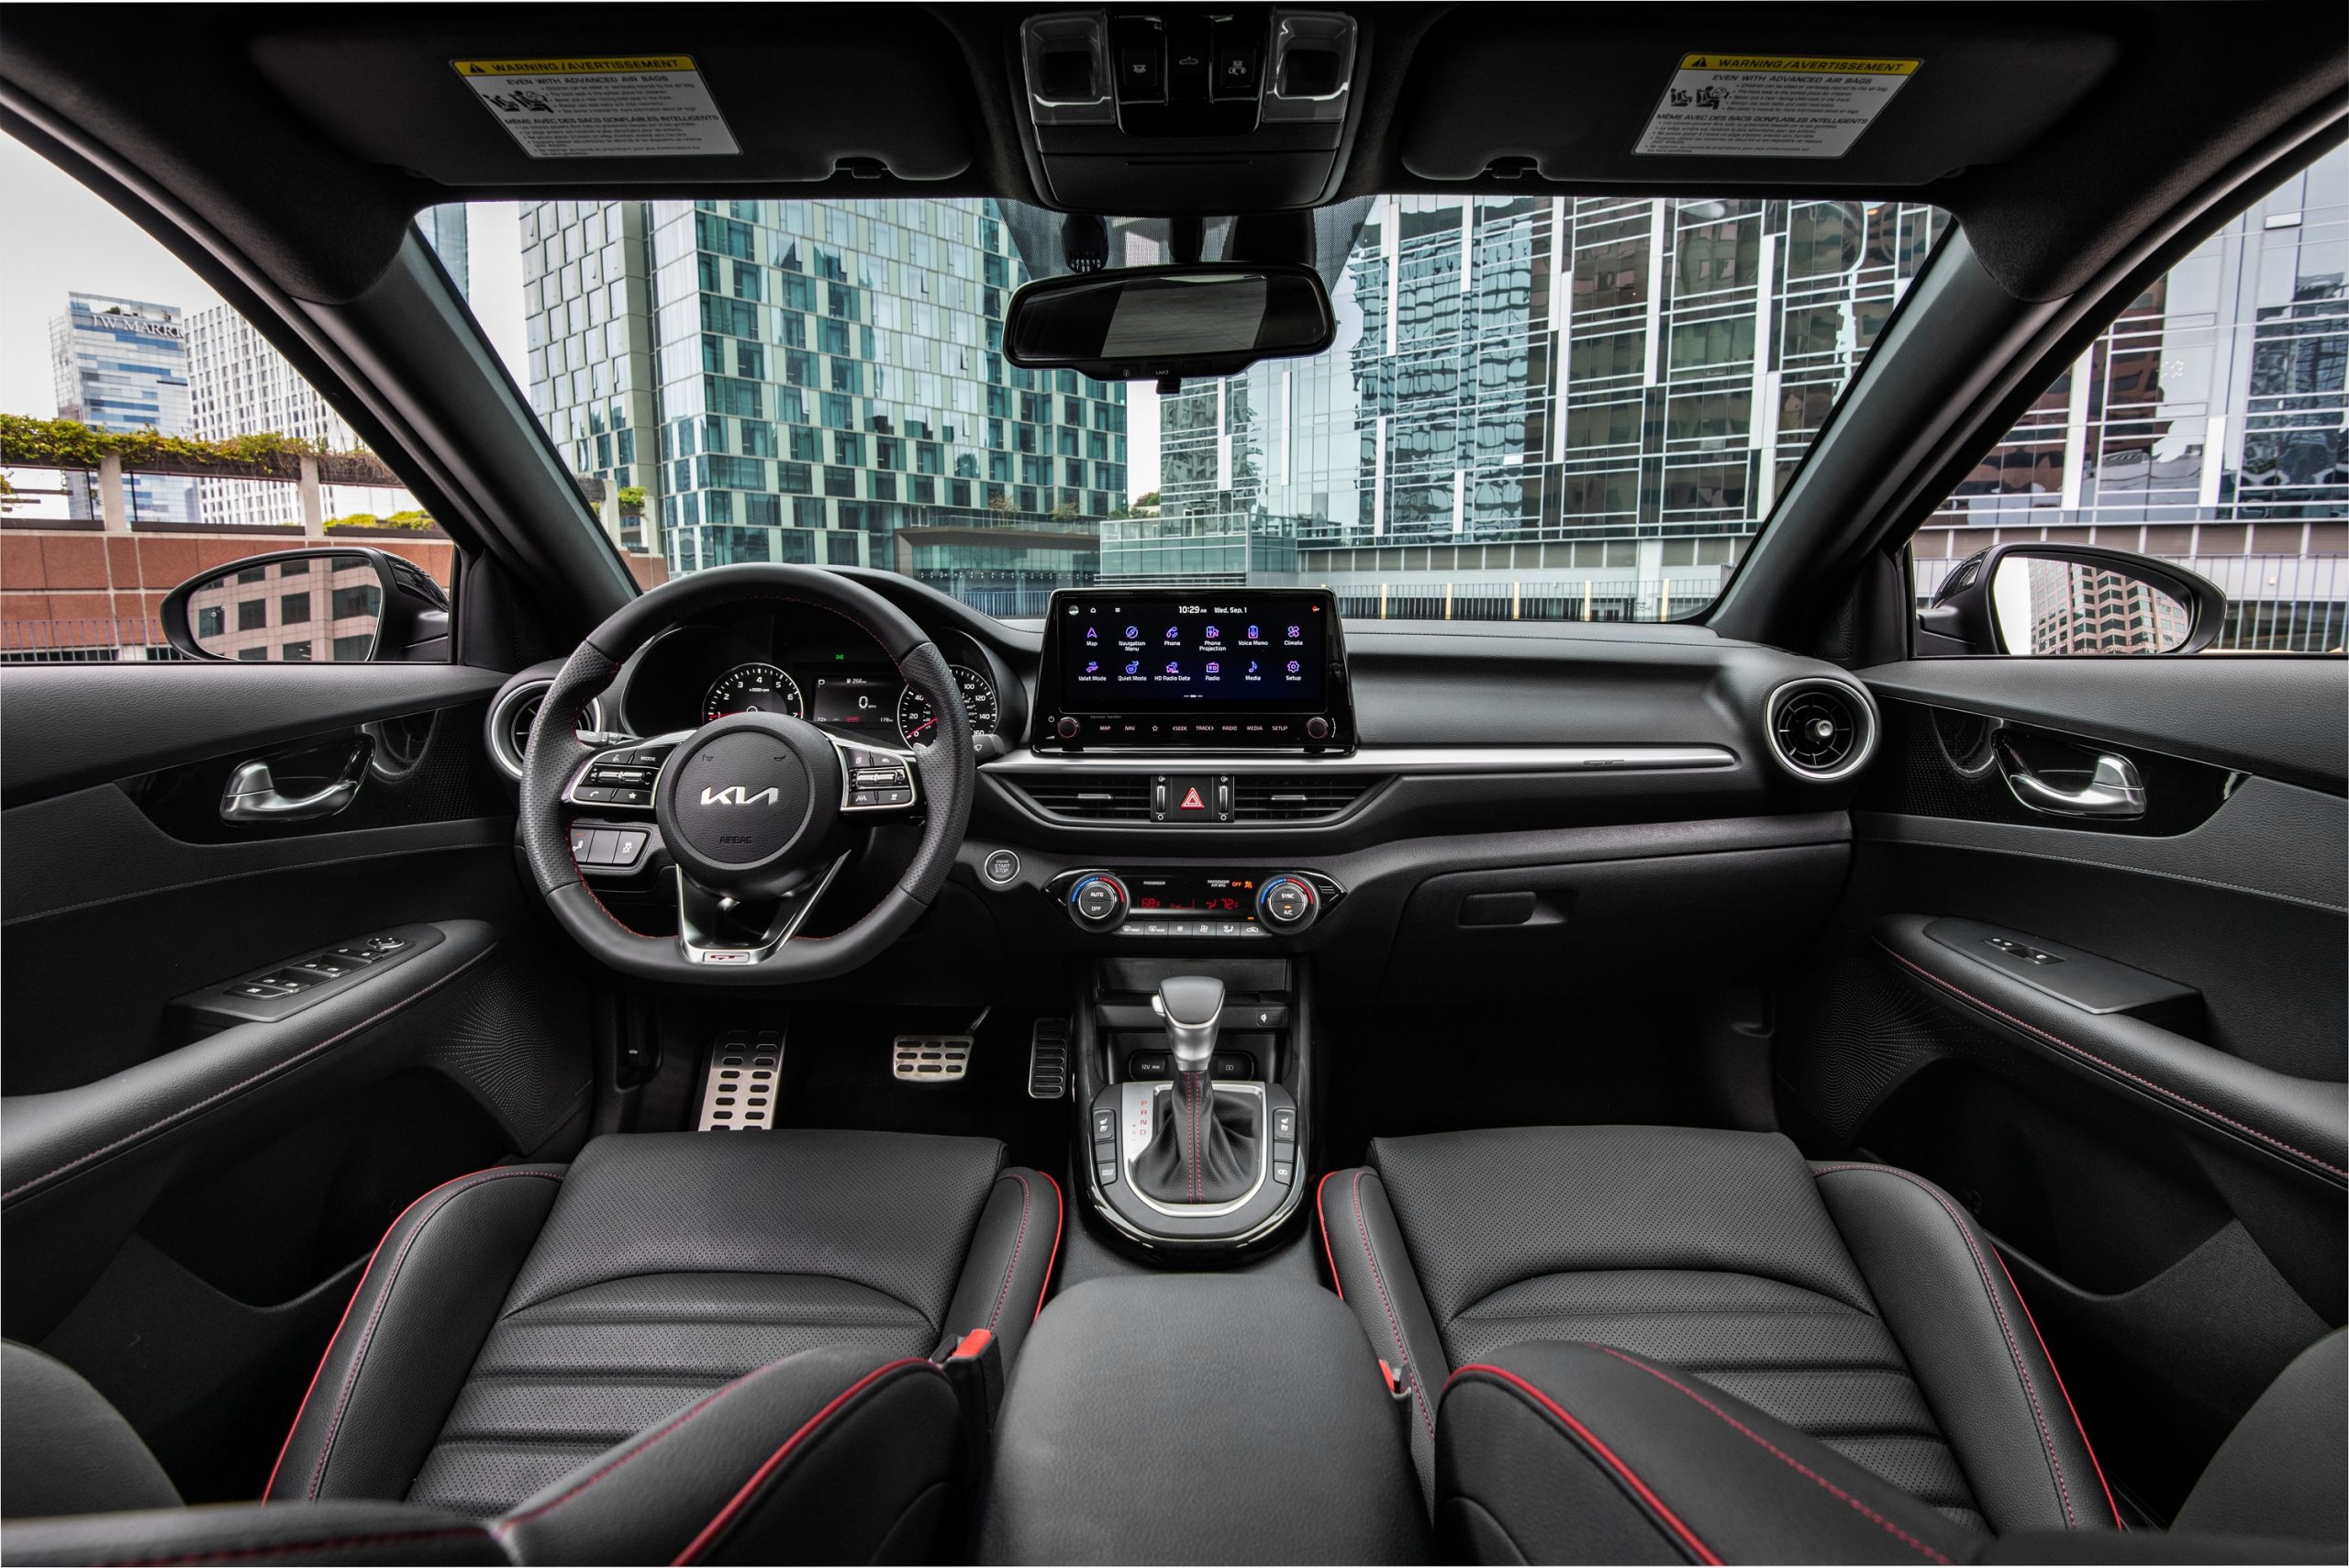 The interior of the new Forte with black leather seats and contrast red stitching